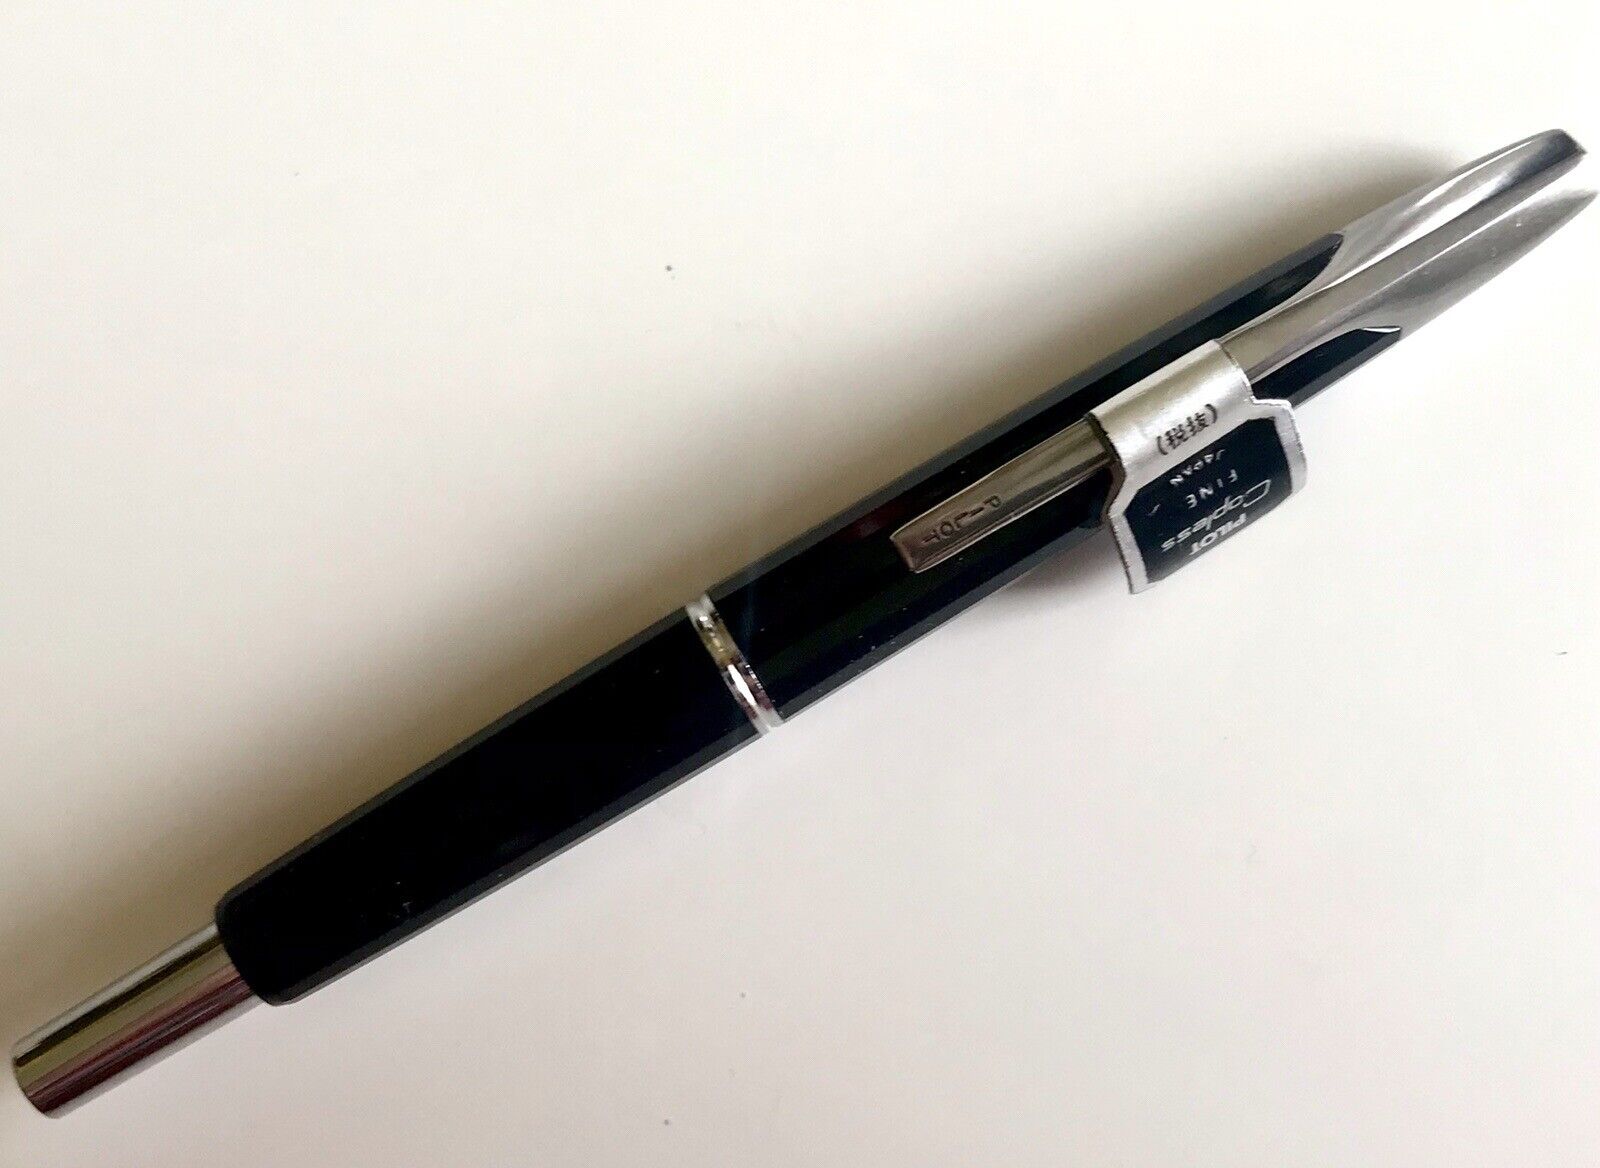 Uninked early PILOT “Capless” Fountain pen in black-appears to be NOS